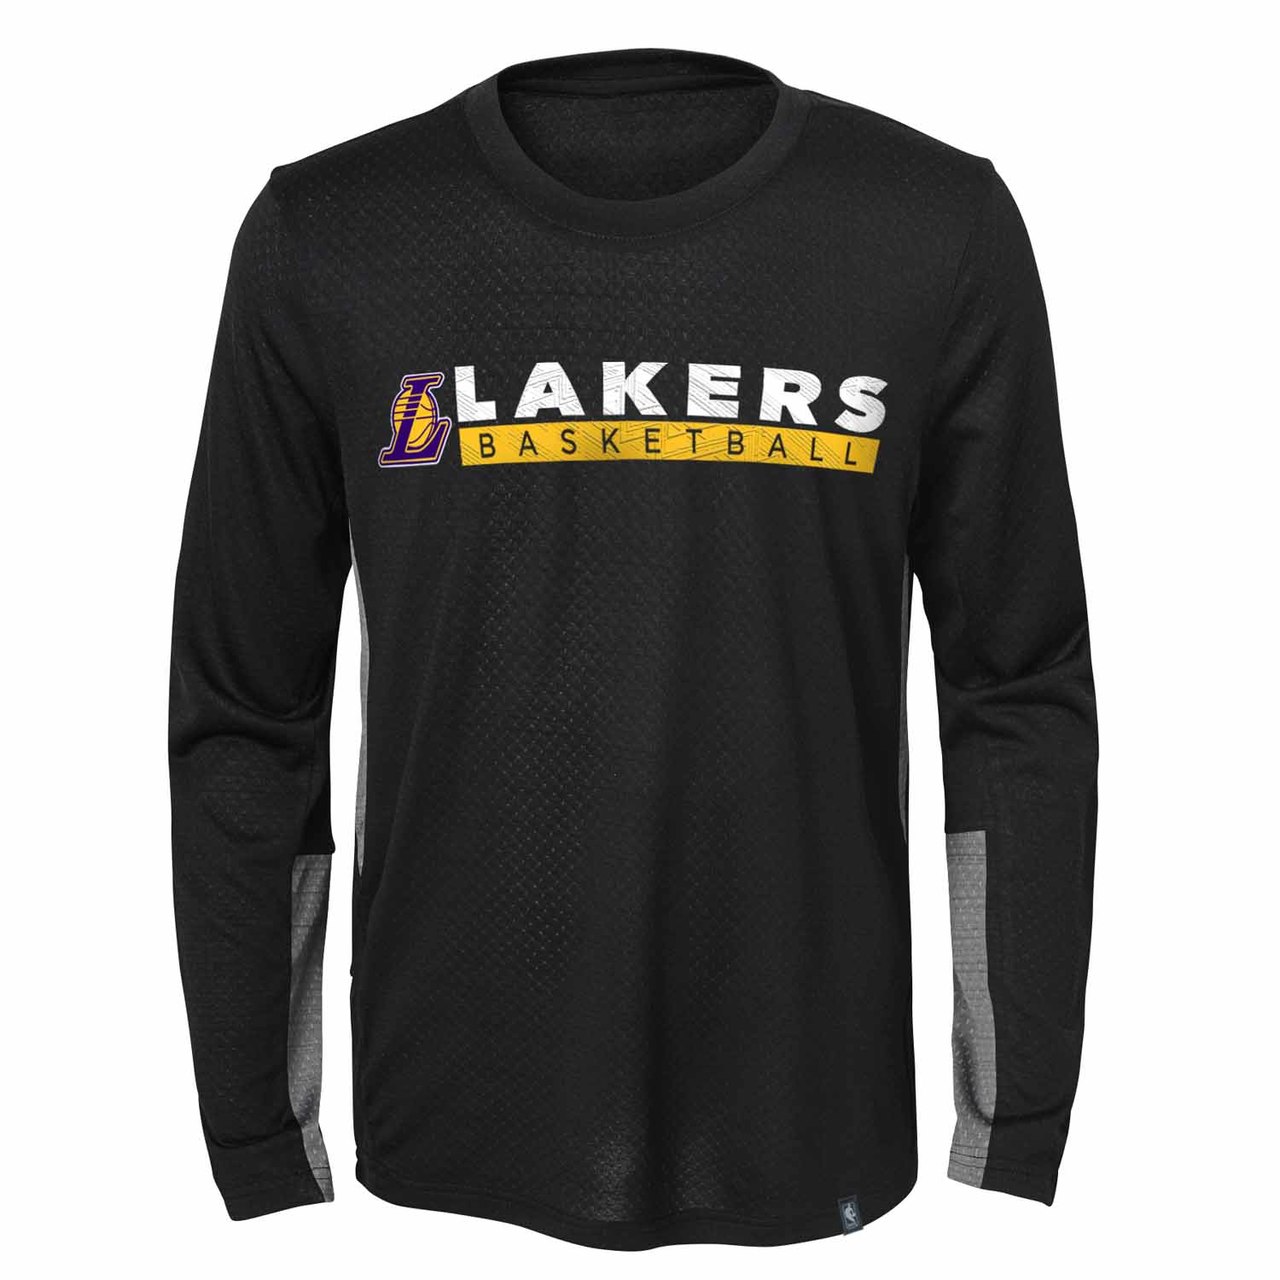 lakers practice performance shirt